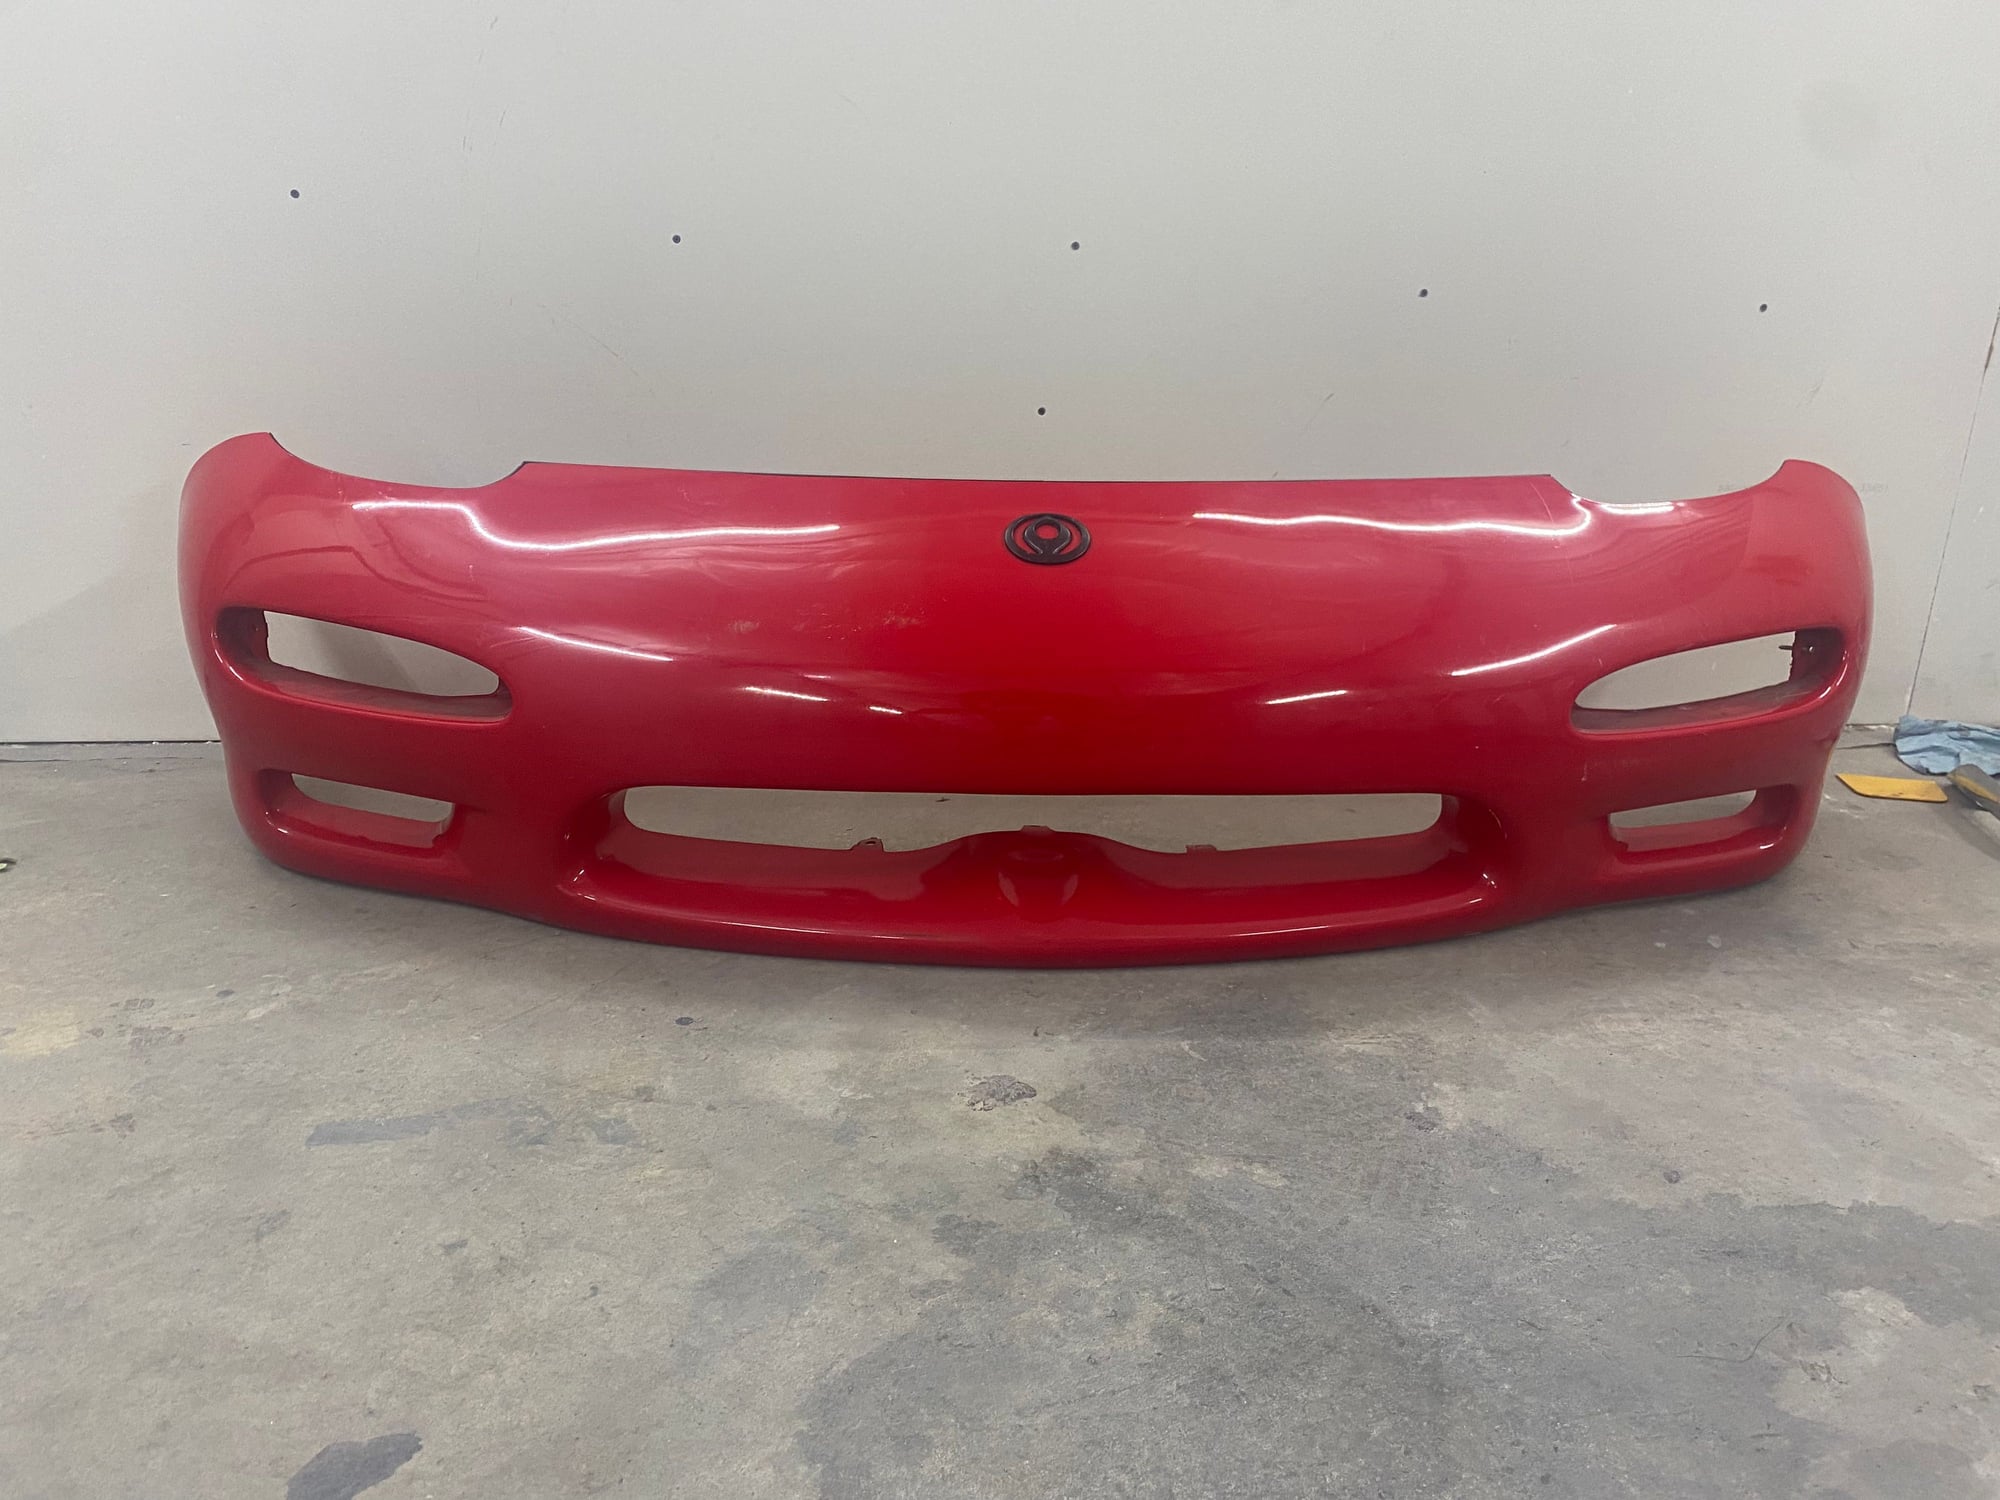 Engine - Internals - Rew plates and housings and oem bumpers - Used - 1993 to 1995 Mazda RX-7 - Marietta, GA 30064, United States